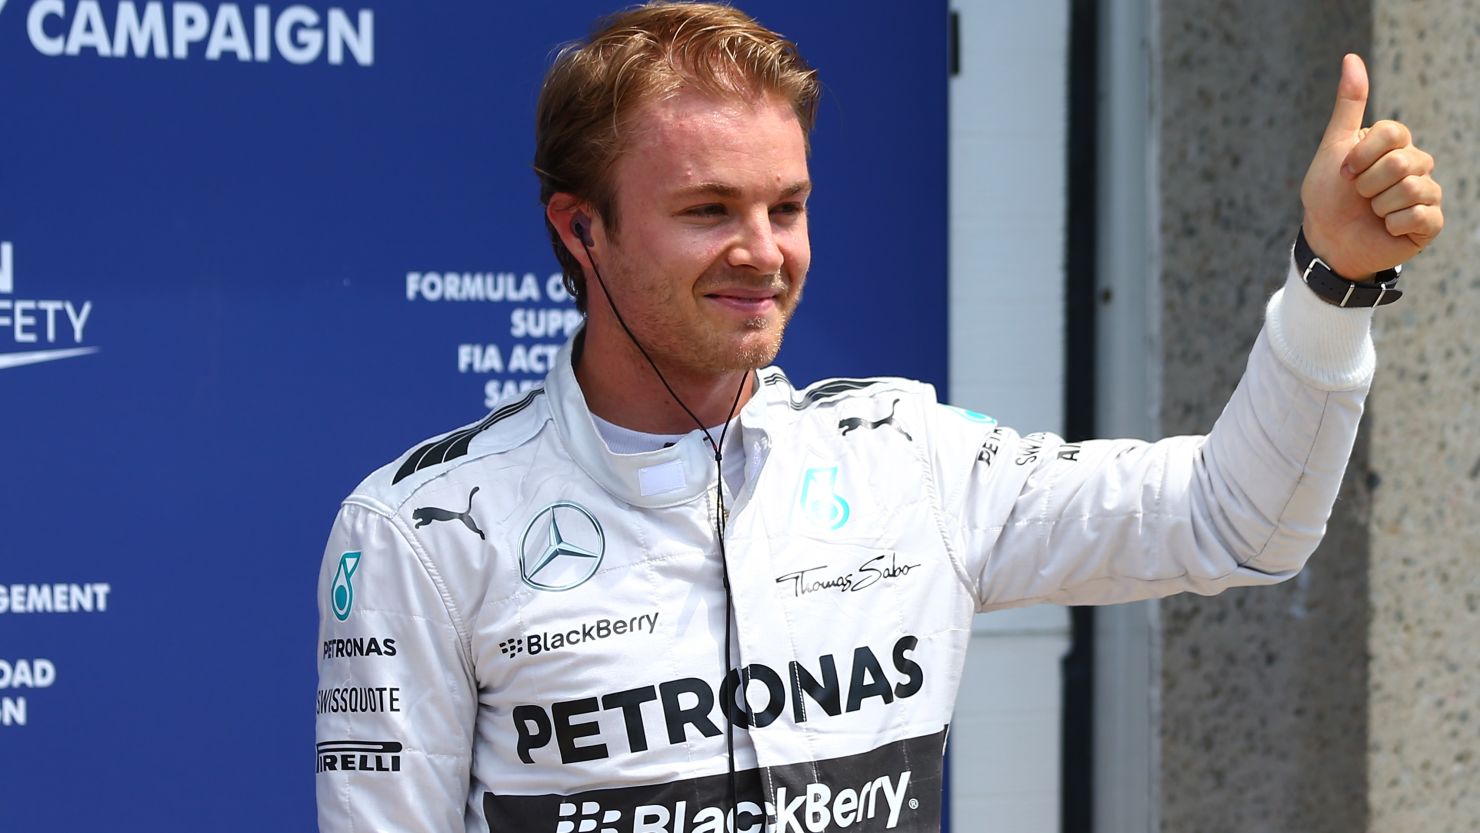 It's a thumb's up for Mercedes man Nico Rosberg as he sets the quickest time around Montreal's circuit 